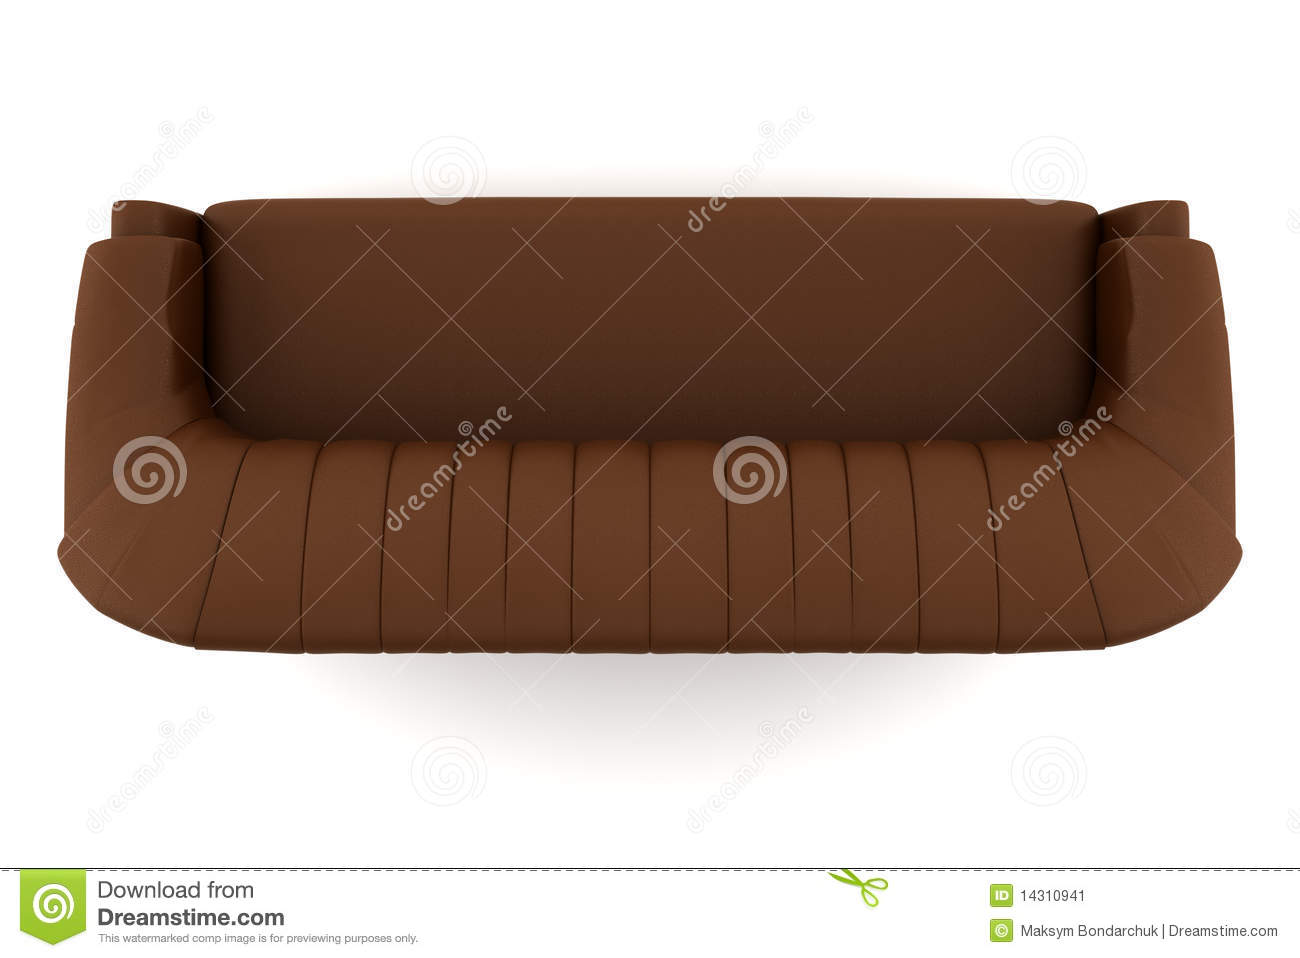 Clipart Couch Top View Top View Of Brown Leather Sofa